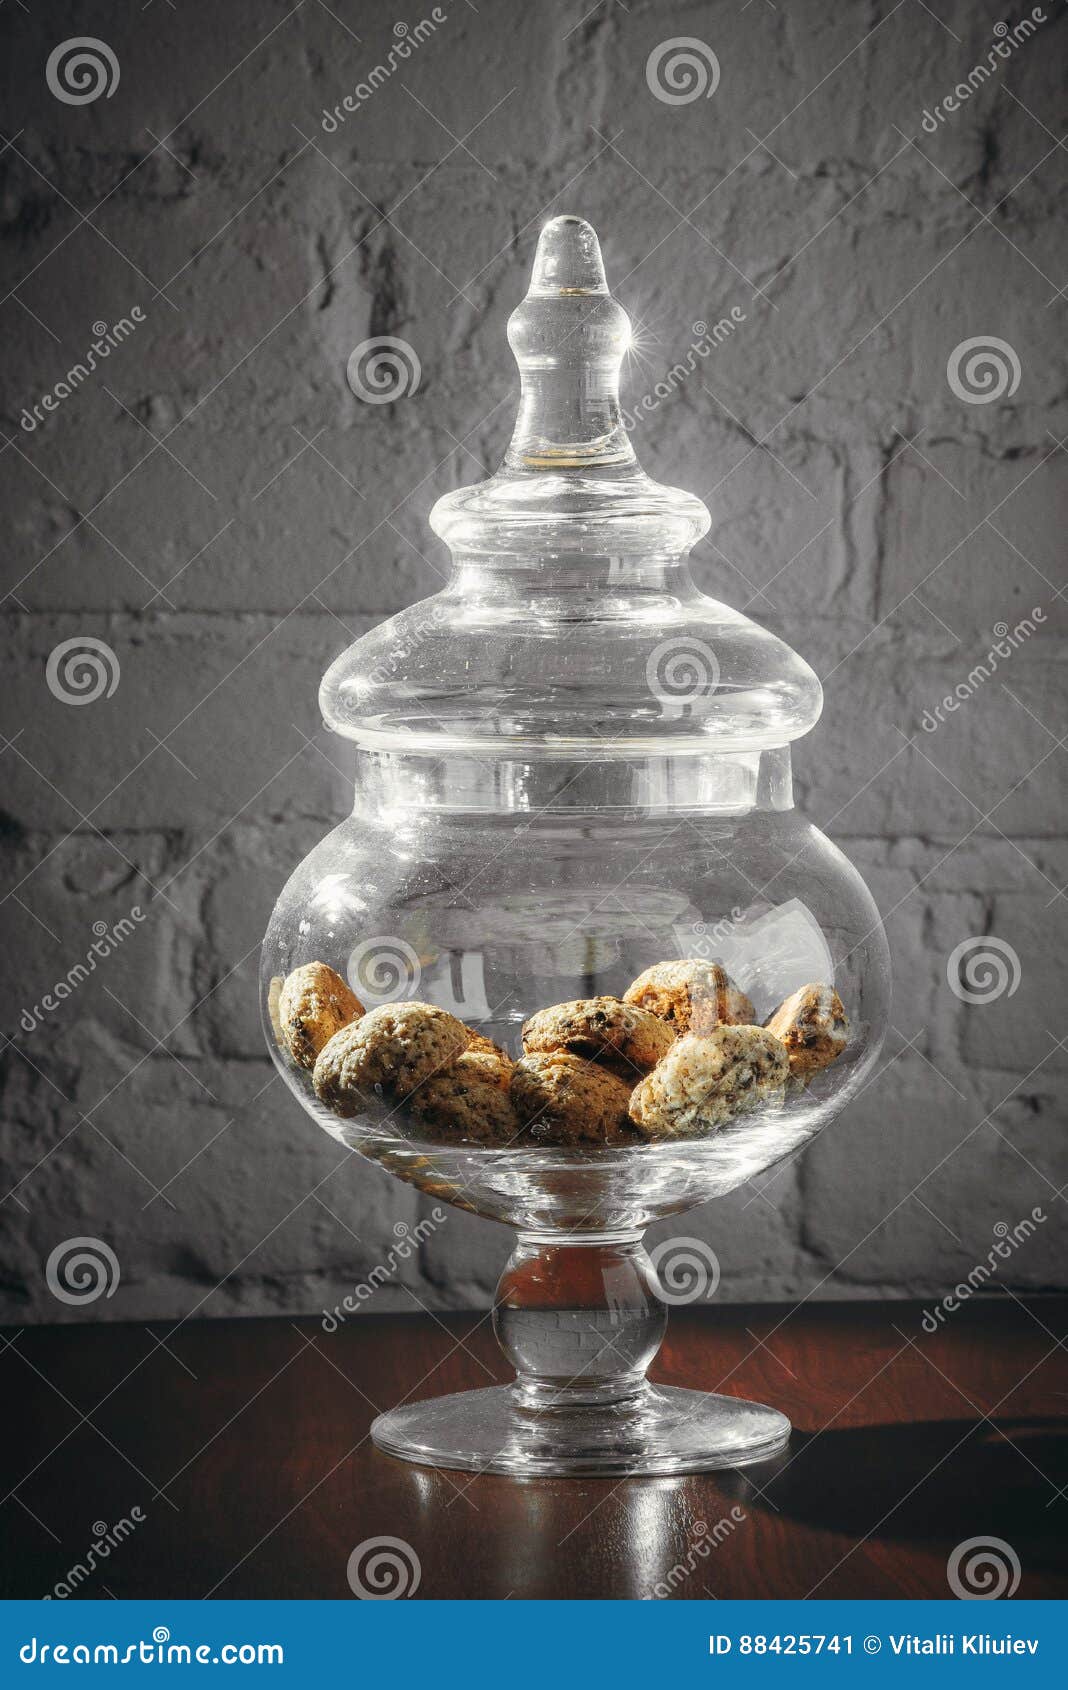 Glass Vase With Cookies And Cover On Desk Near Grey Wall Stock